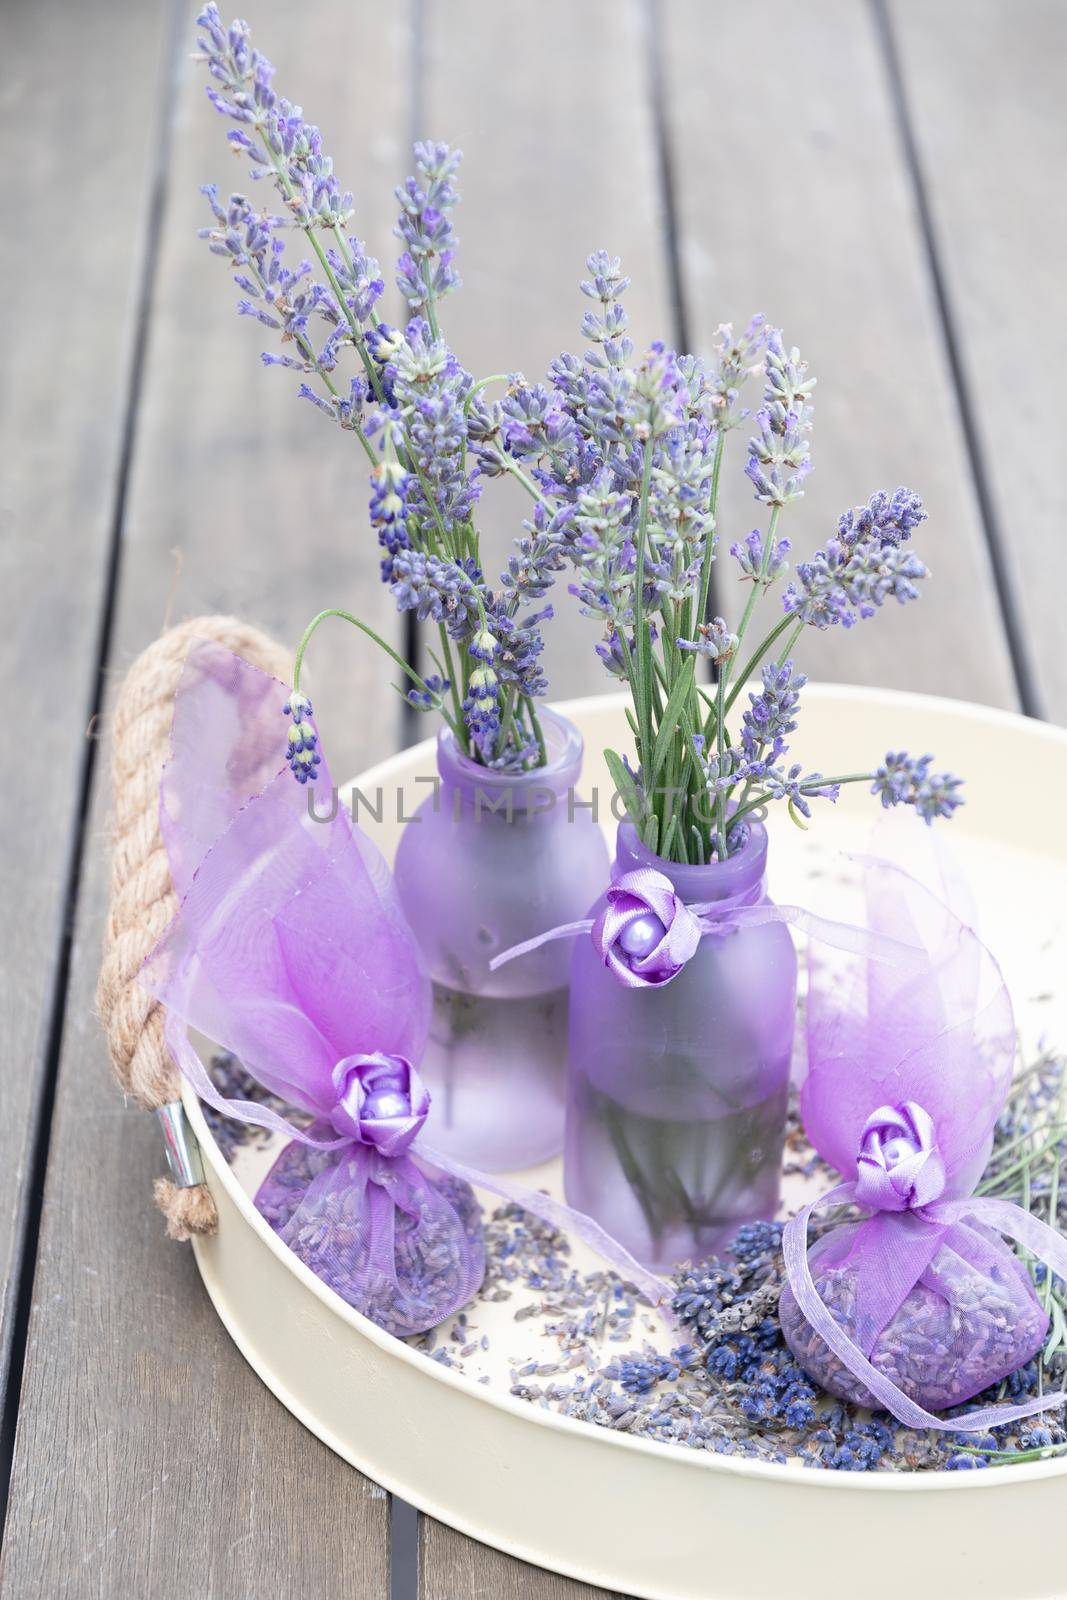 Lilac lavender in vases and lavender sachets in chiffon bags on a tray with dry flowers, aromatherapy, purple background, floral still life. High quality photo